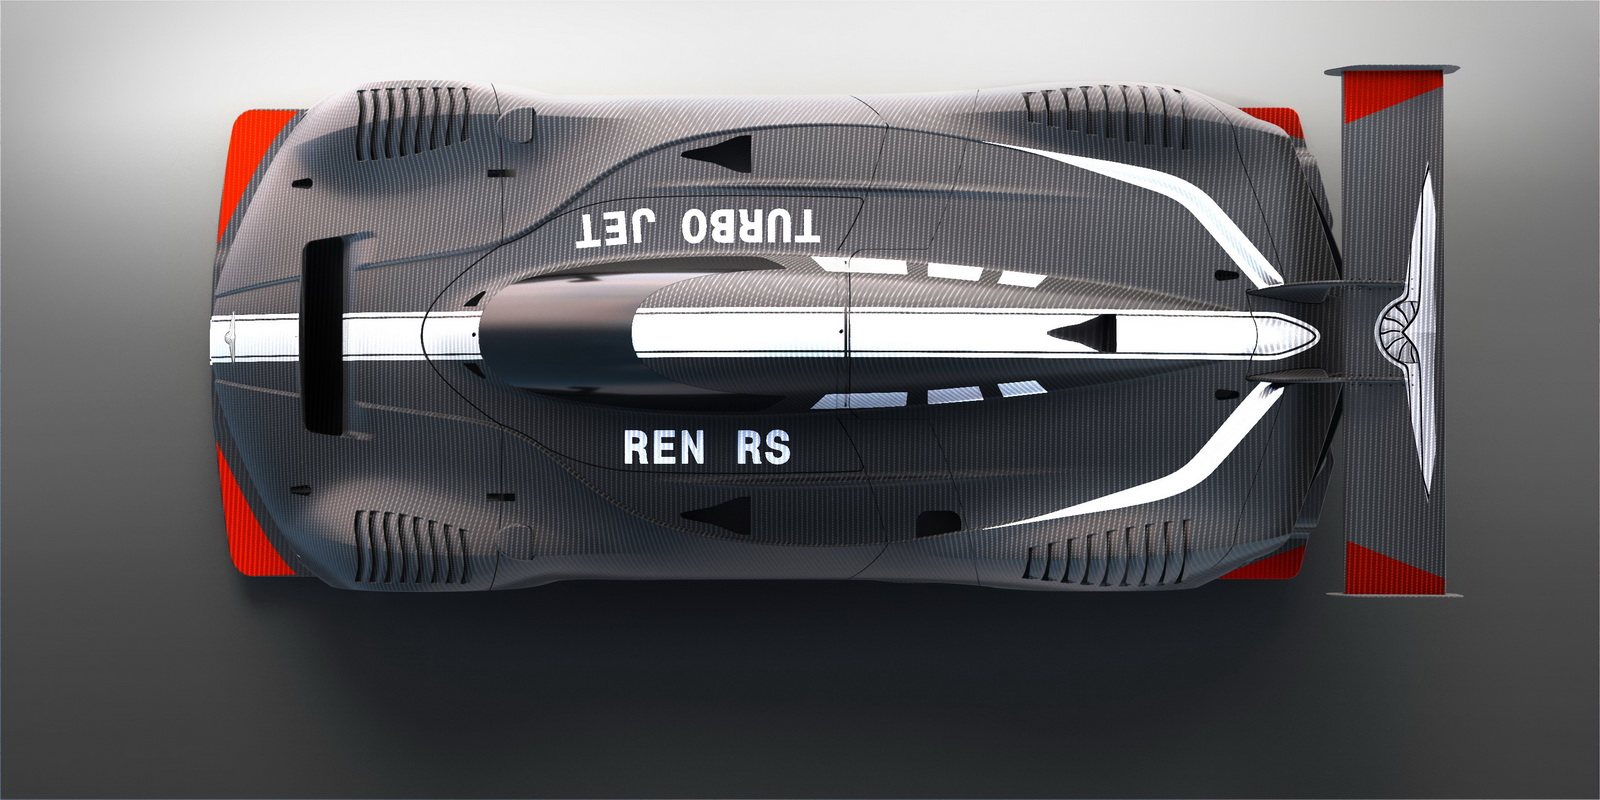 Techrules Ren RS Single-Seater Diesel-Electric Hypercar Coming To Geneva With 1,305PS